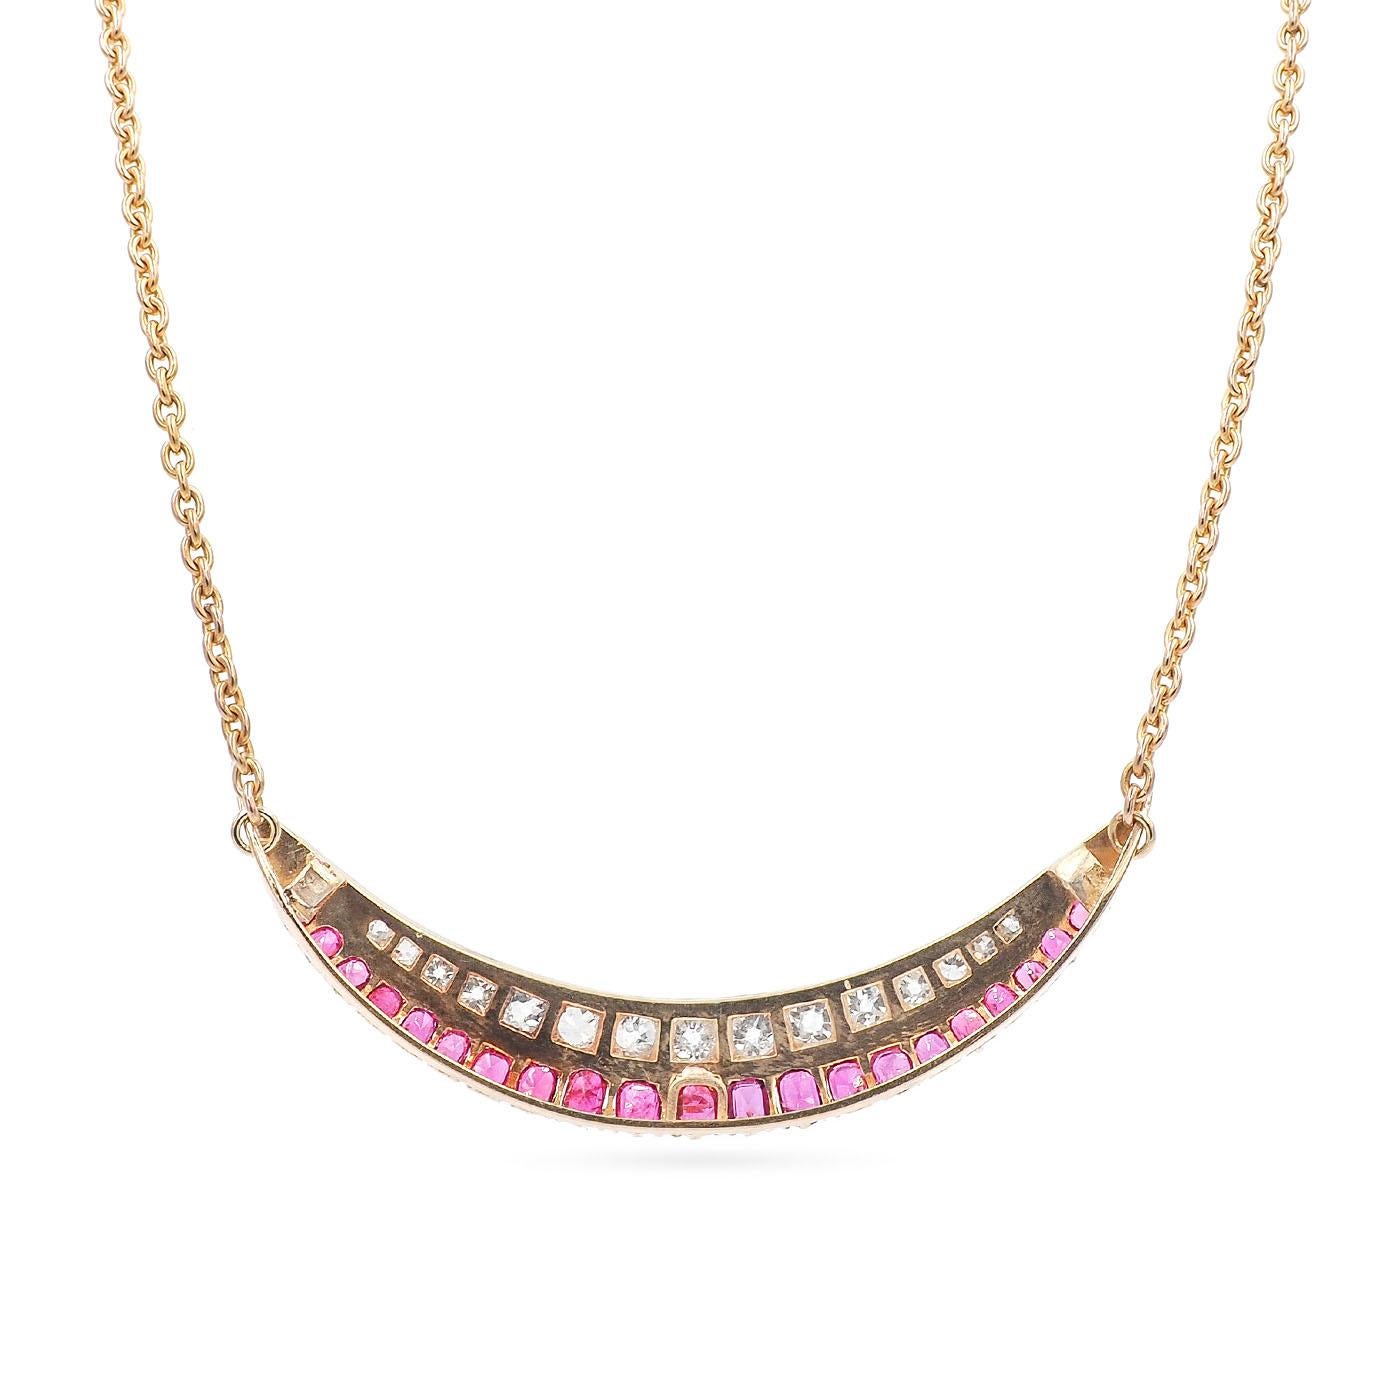 Edwardian era Crescent Moon Necklace composed of 18k yellow gold and platinum. Set with 15 bright & white Old Mine Cut diamonds weighing approximately 3.00 carats in total and 21 Natural Unheated Rubies weighing approximately 3.70 carats in total.